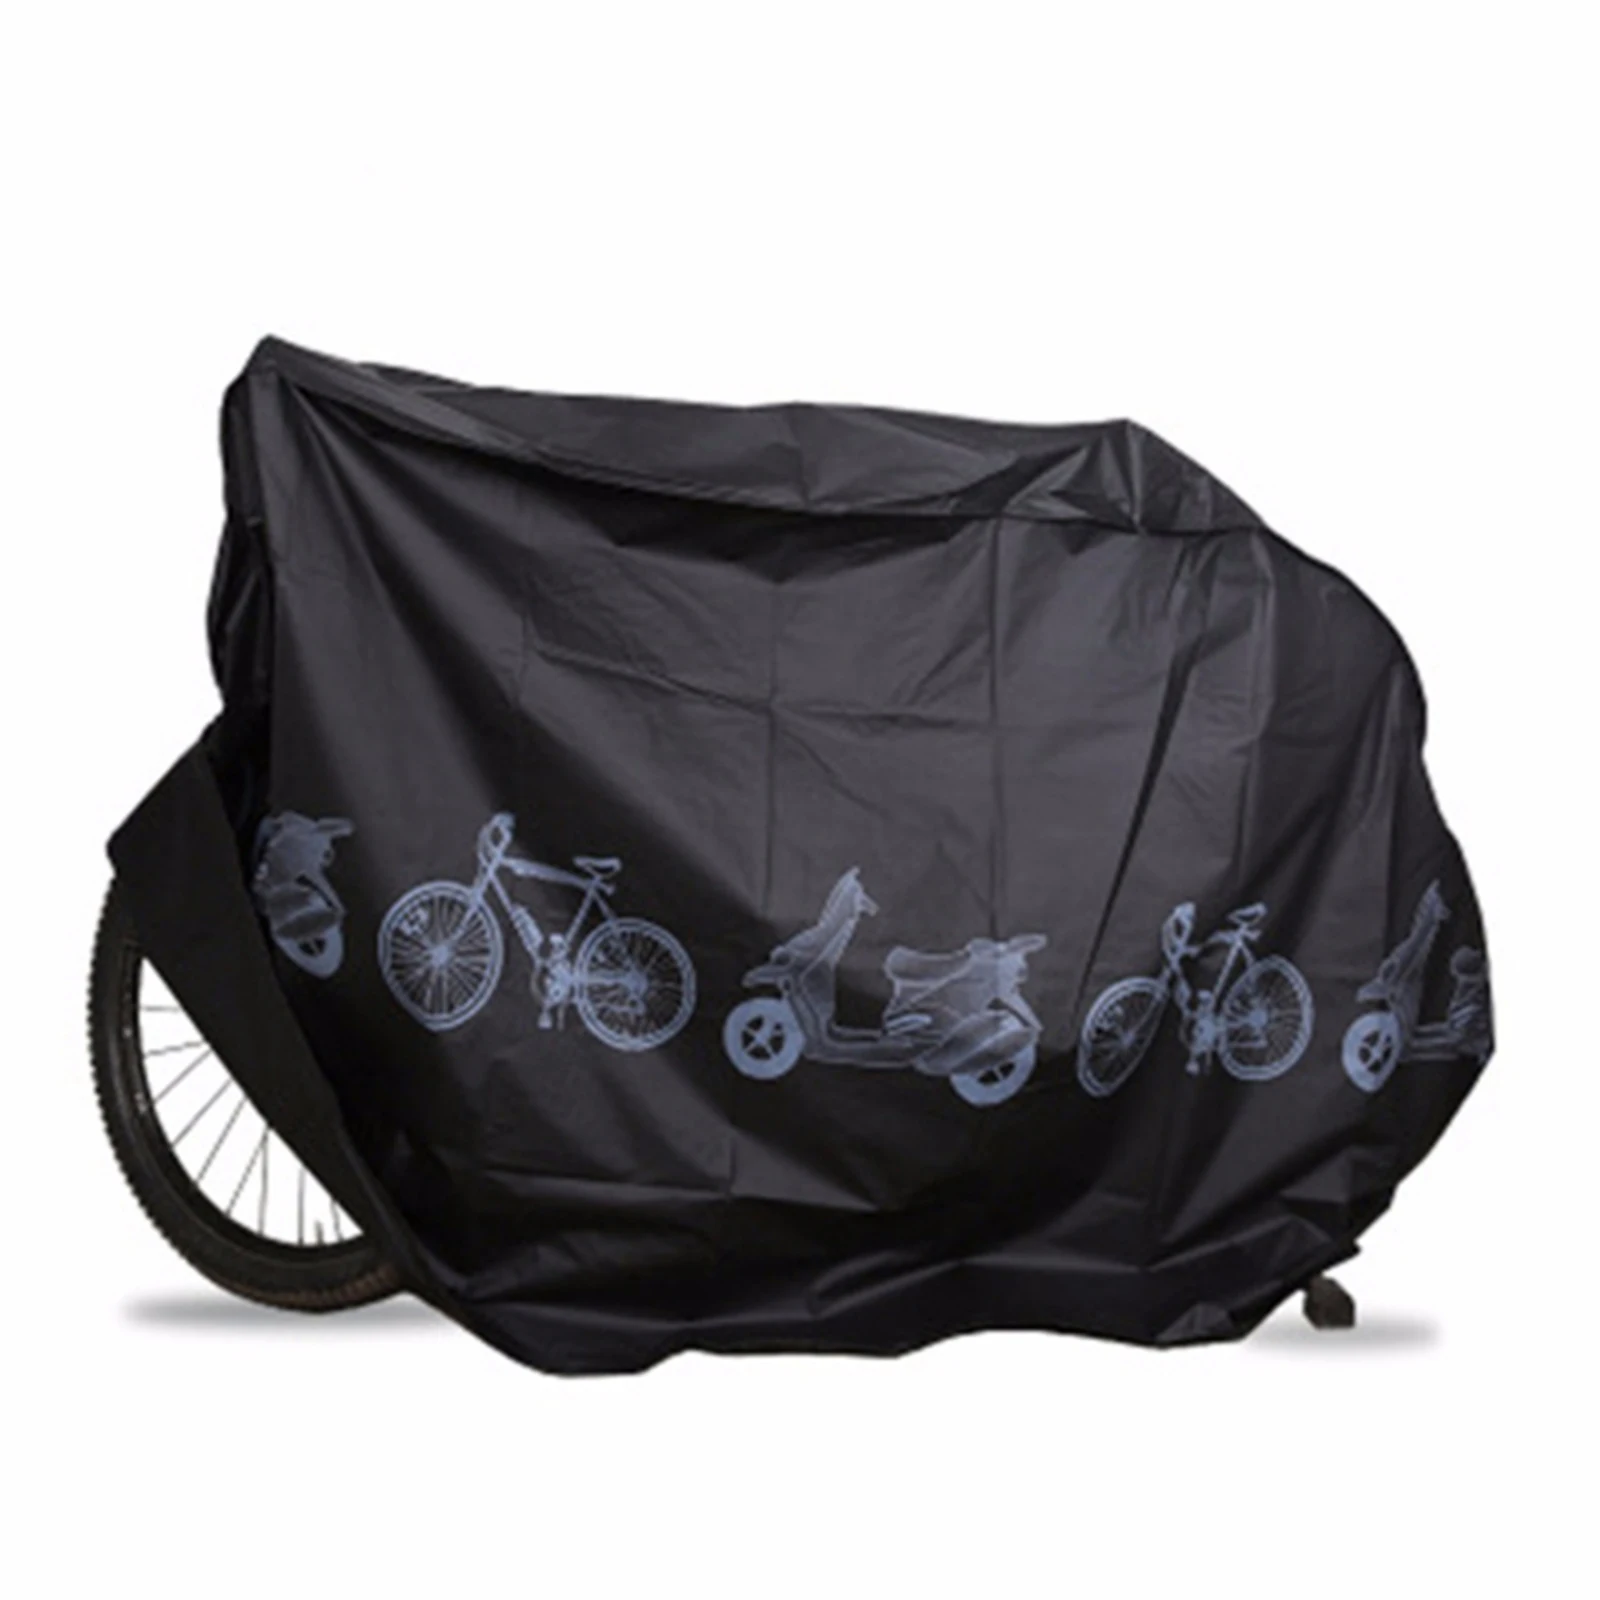 Waterproof Bike Cover Bicycle Dust Cover Rain Cover Outdoor Large Size Portable MTB Bicycle Cover Accessories 210x100cm